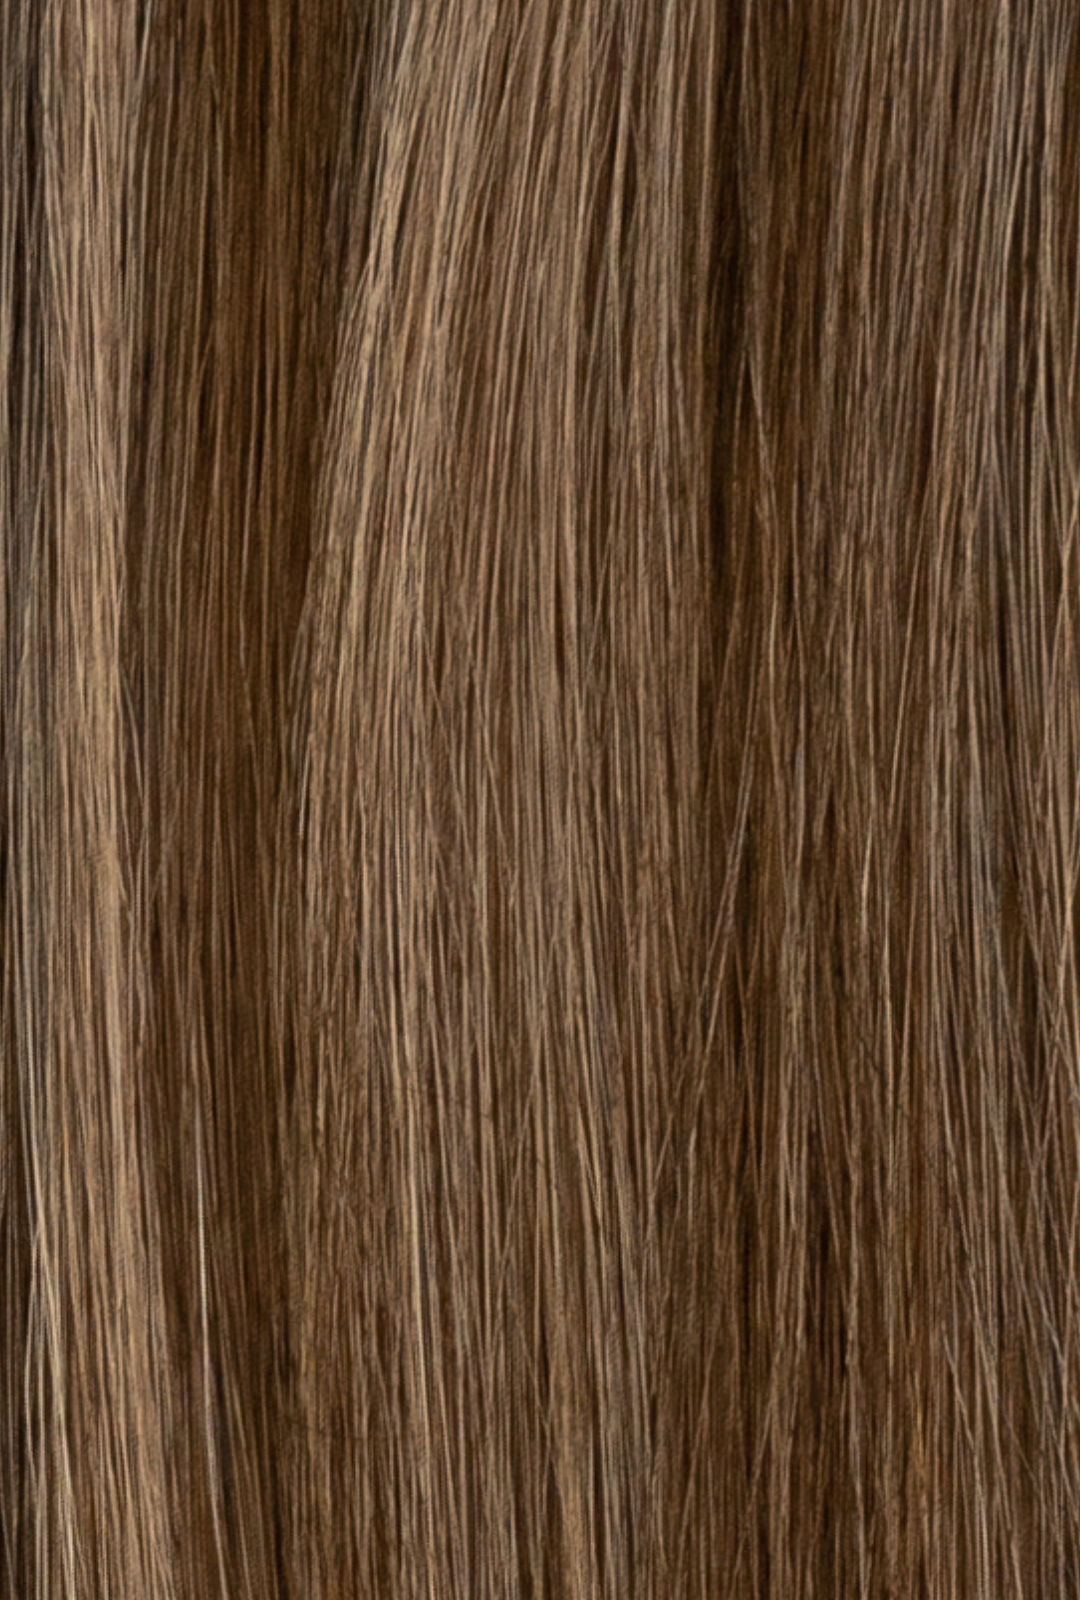 Halfsies Machine Sewn Weft Extensions Dimensional #4/8 (Cappuccino)